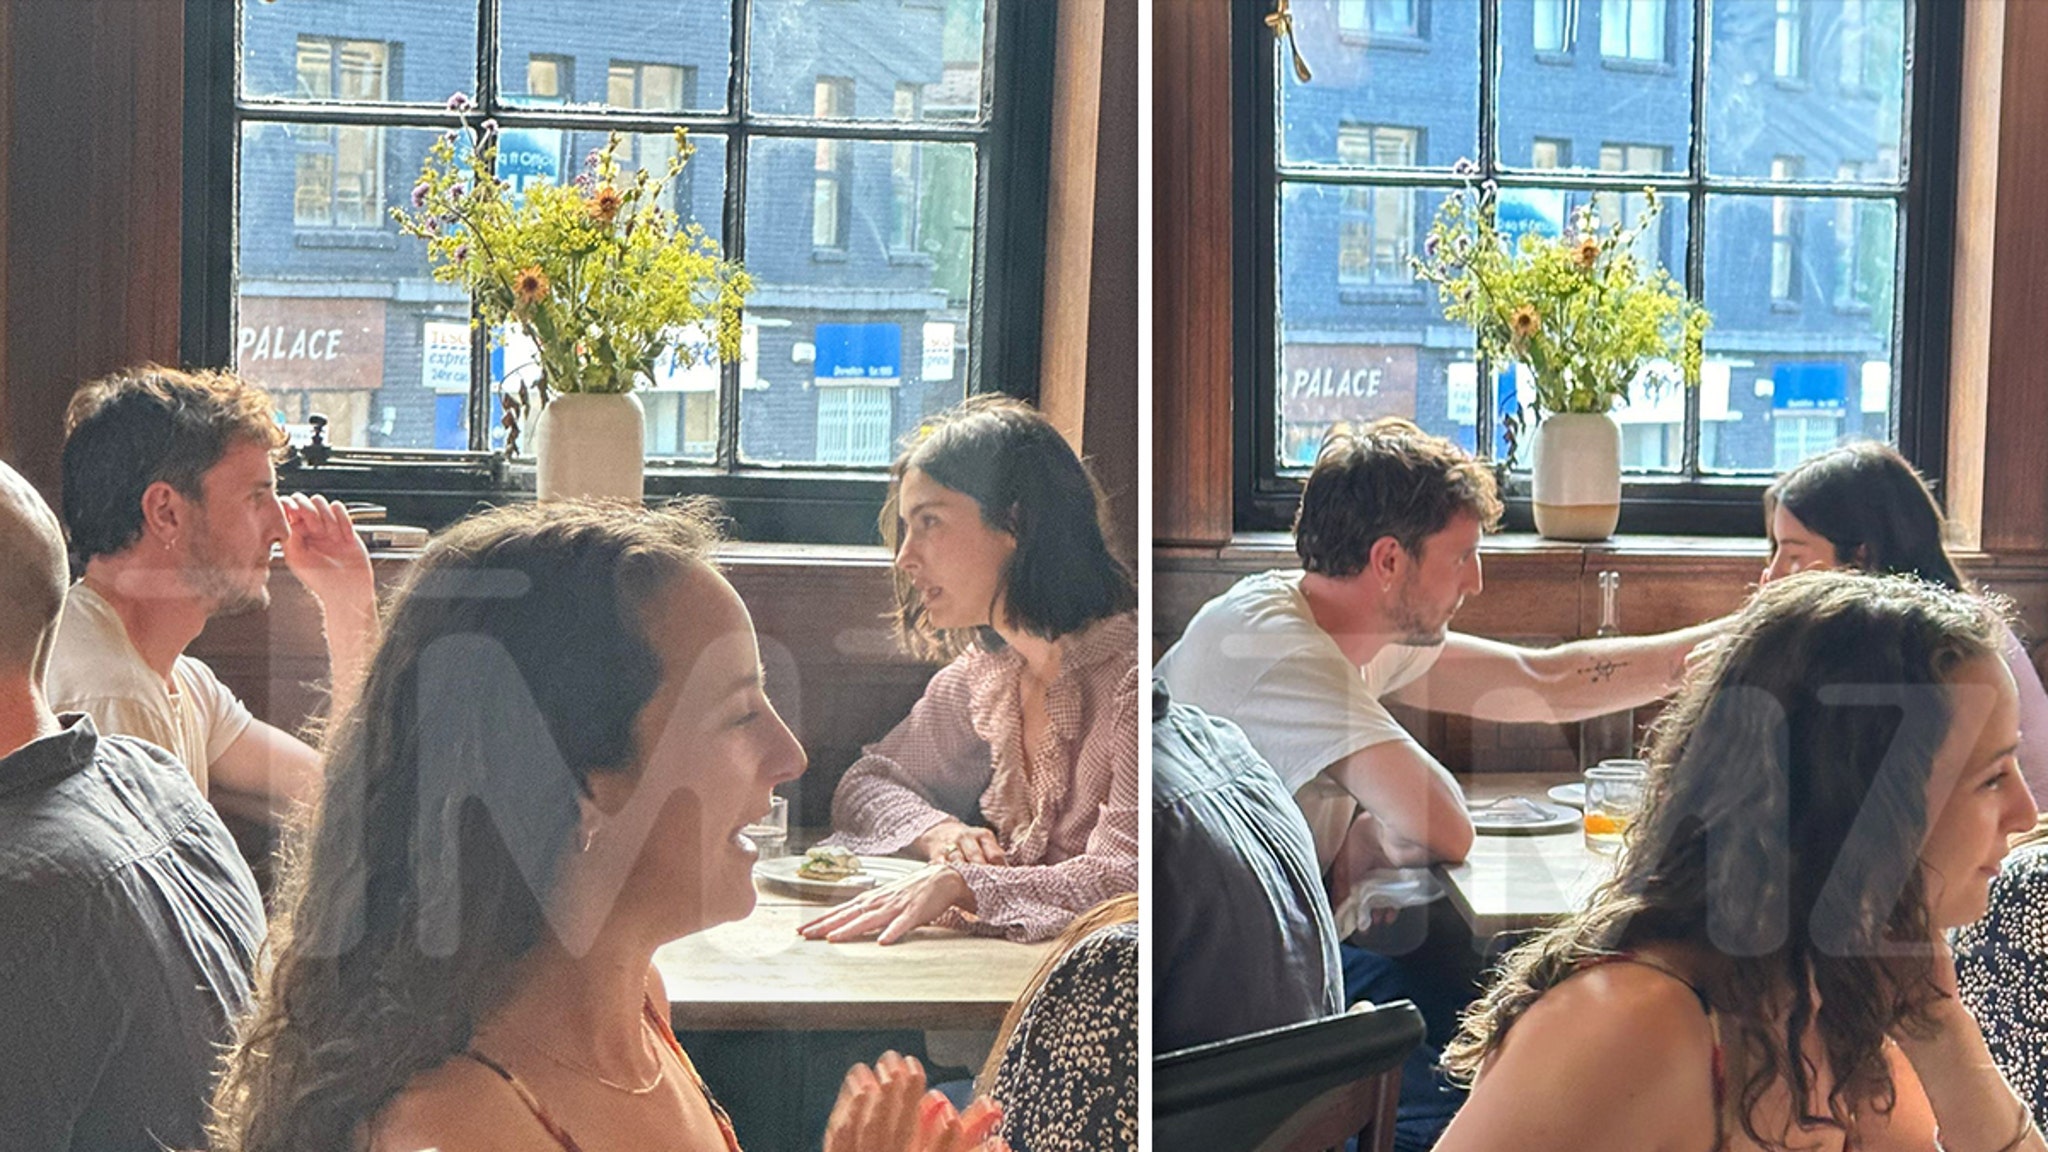 Paul Mescal on a date with Gracie Abrams in London